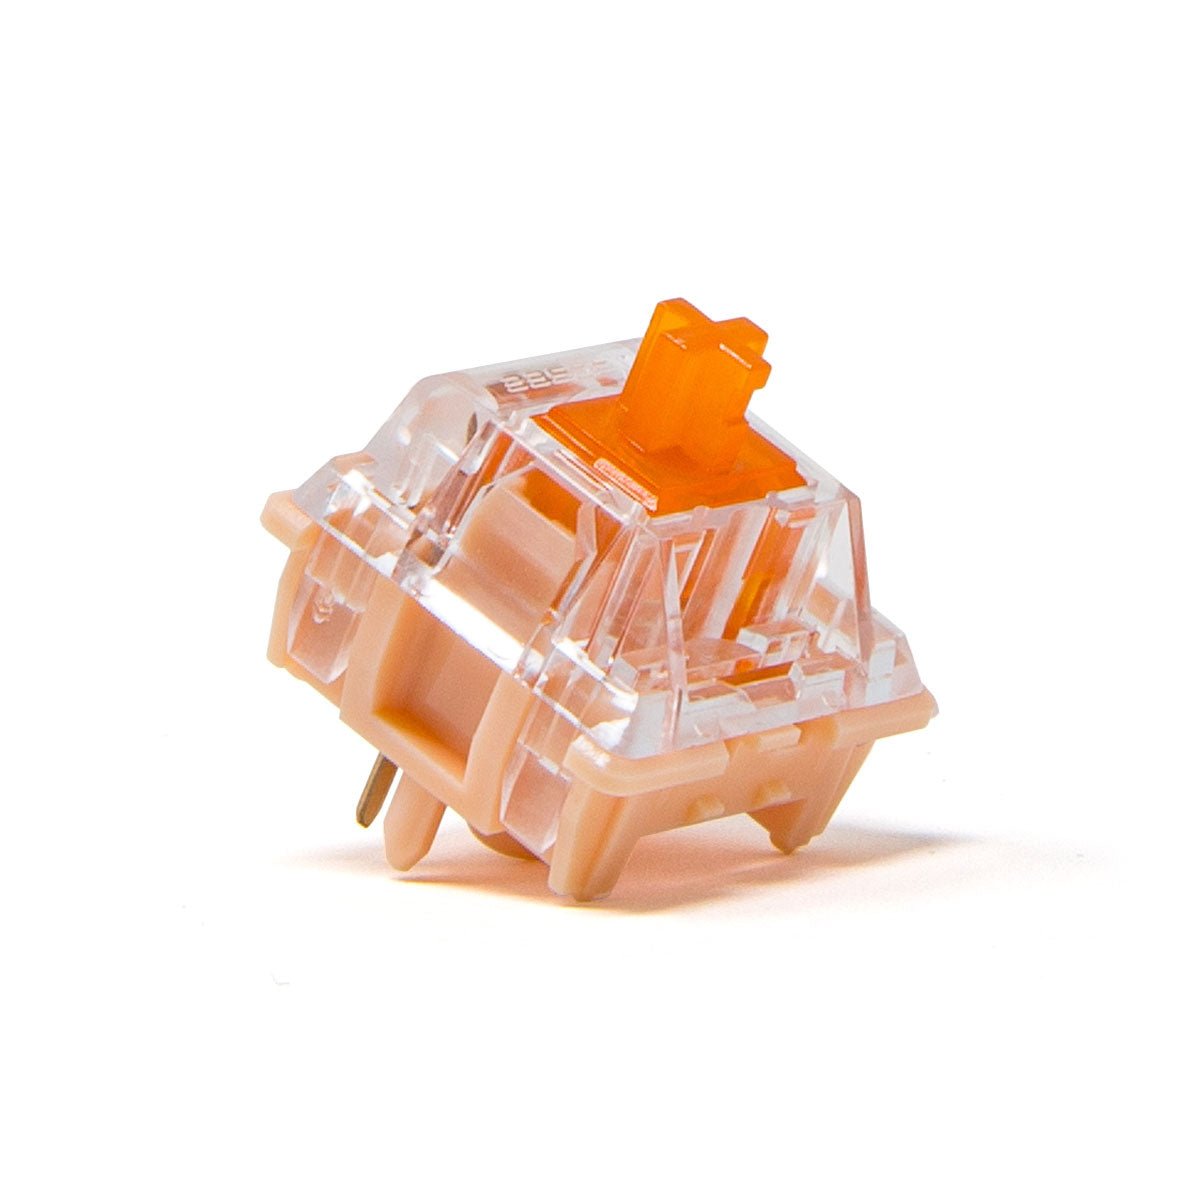 Tecsee Coral Tactile Switches - Divinikey